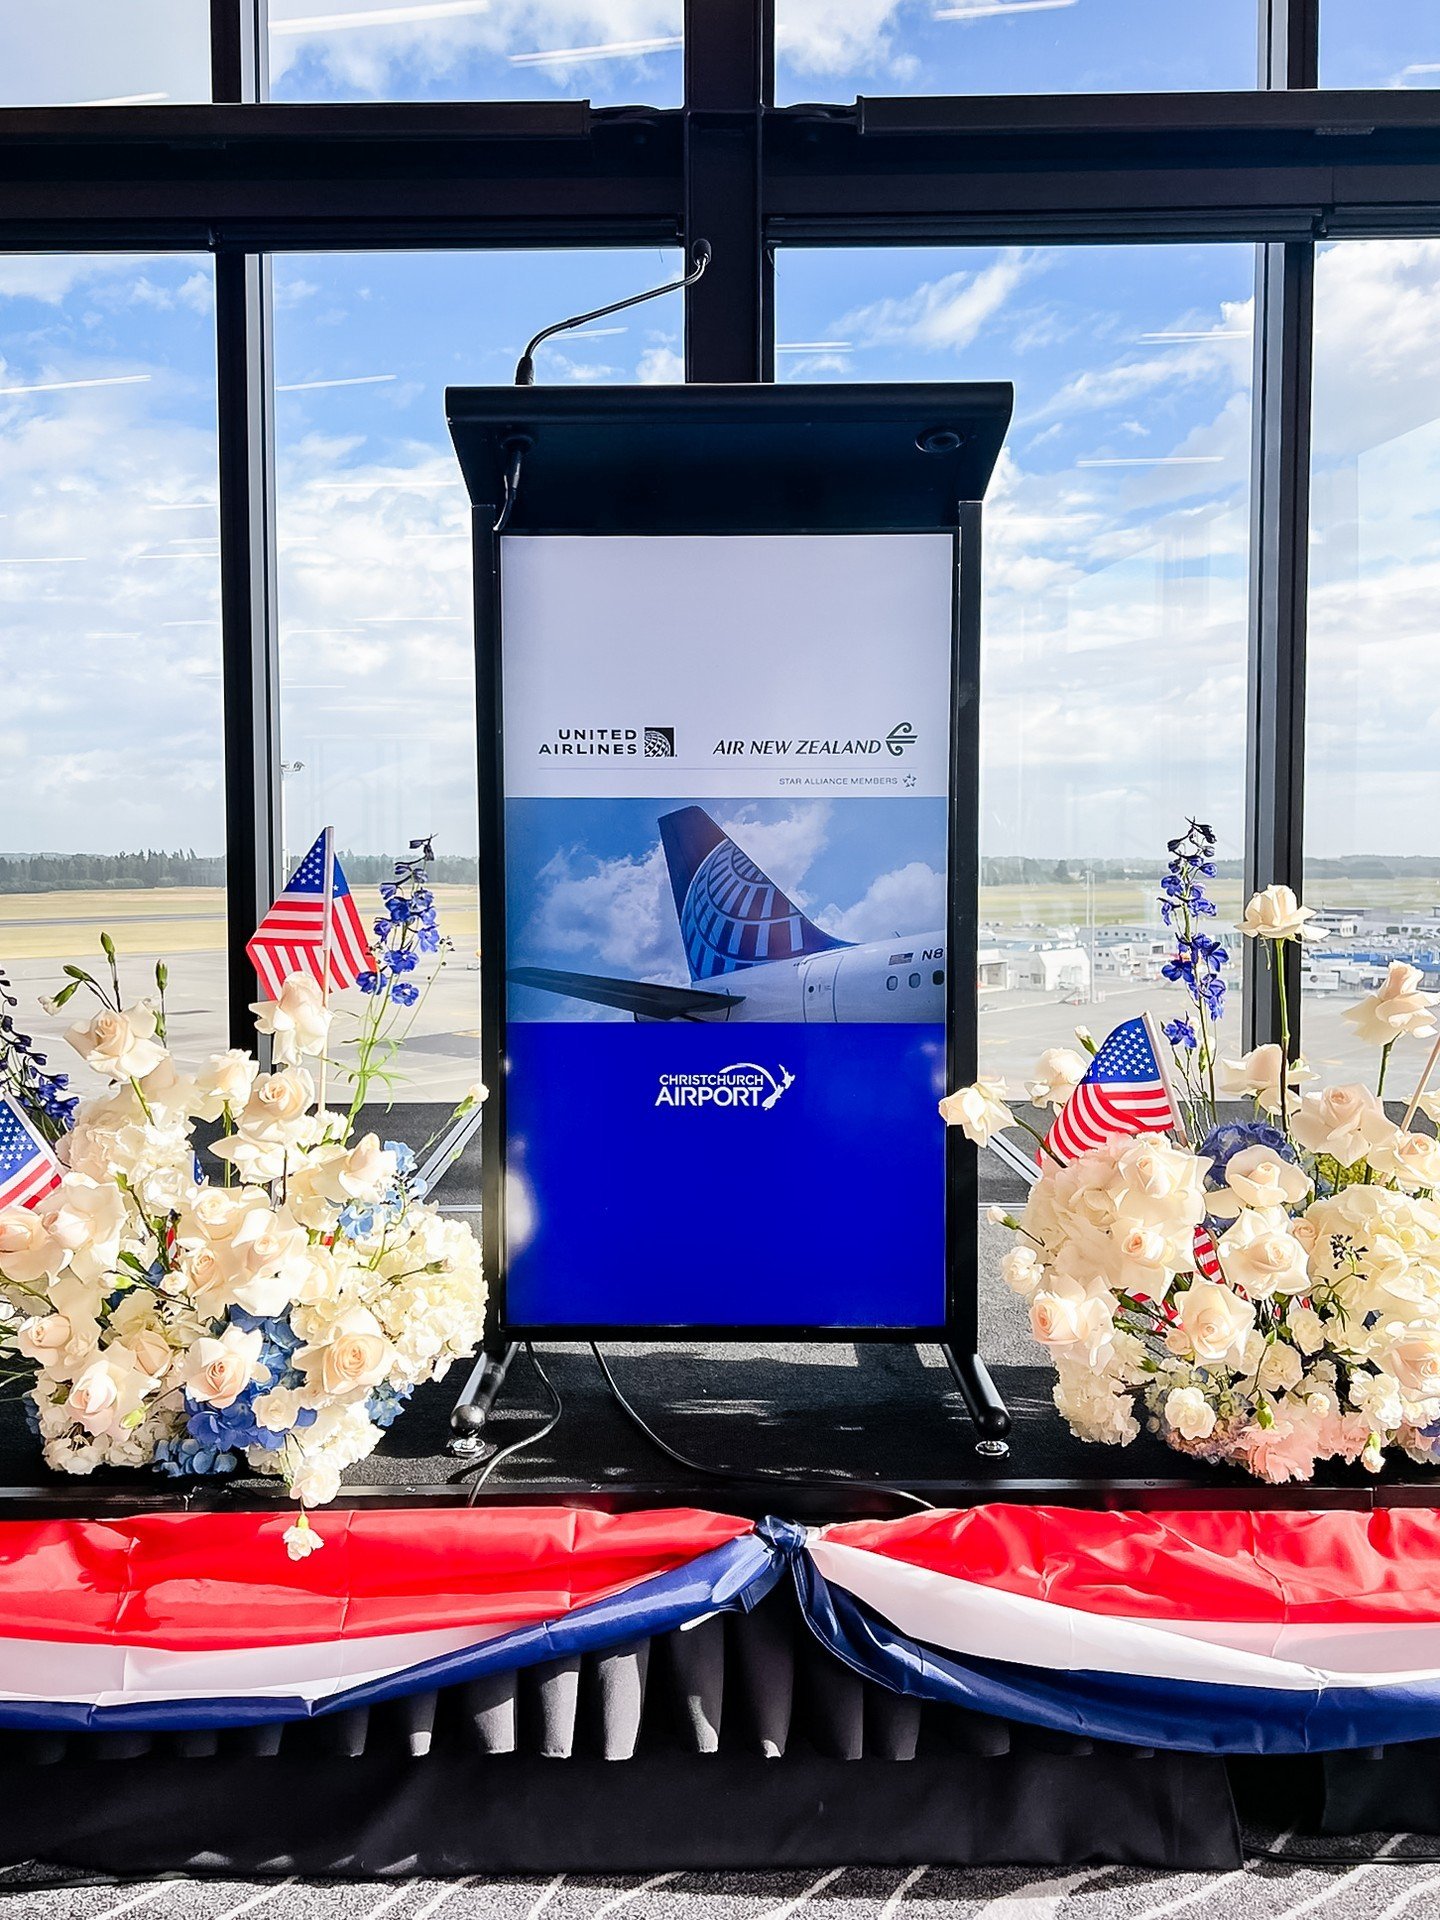 They asked, we styled! 🇺🇸⁣
⁣
We were honoured to be carefully chosen to style the opening formalities to welcome United Airlines to Christchurch. 

The main event - the United Airlines Brunch was held in the Tekapo Room at Novotel - USA flags, lush